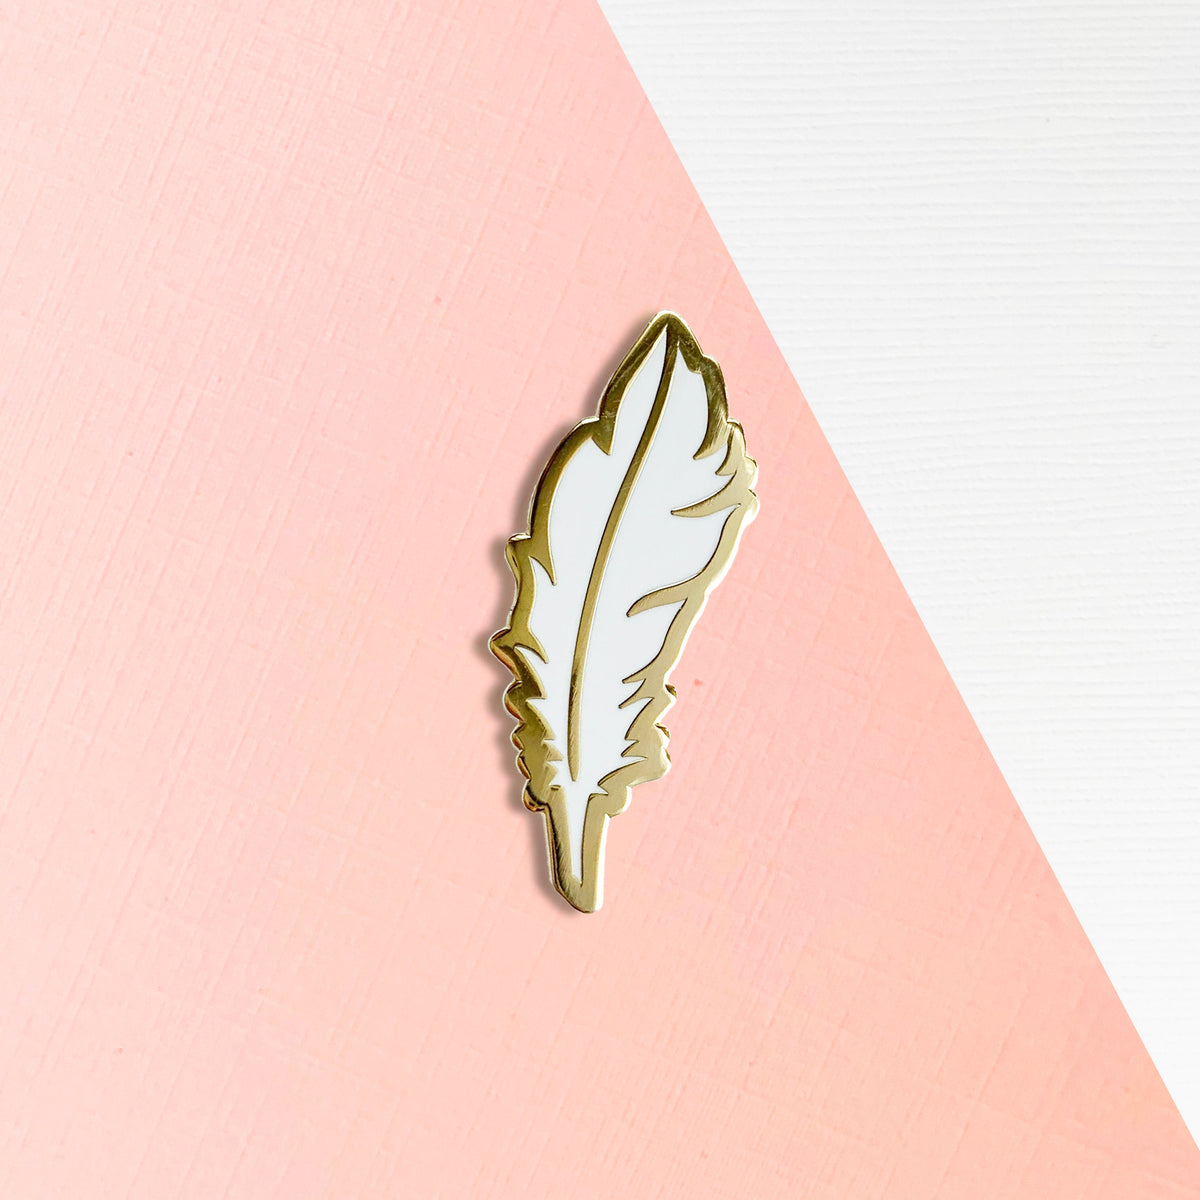 Pegasus Feather Enamel Pin by Shumi Collective